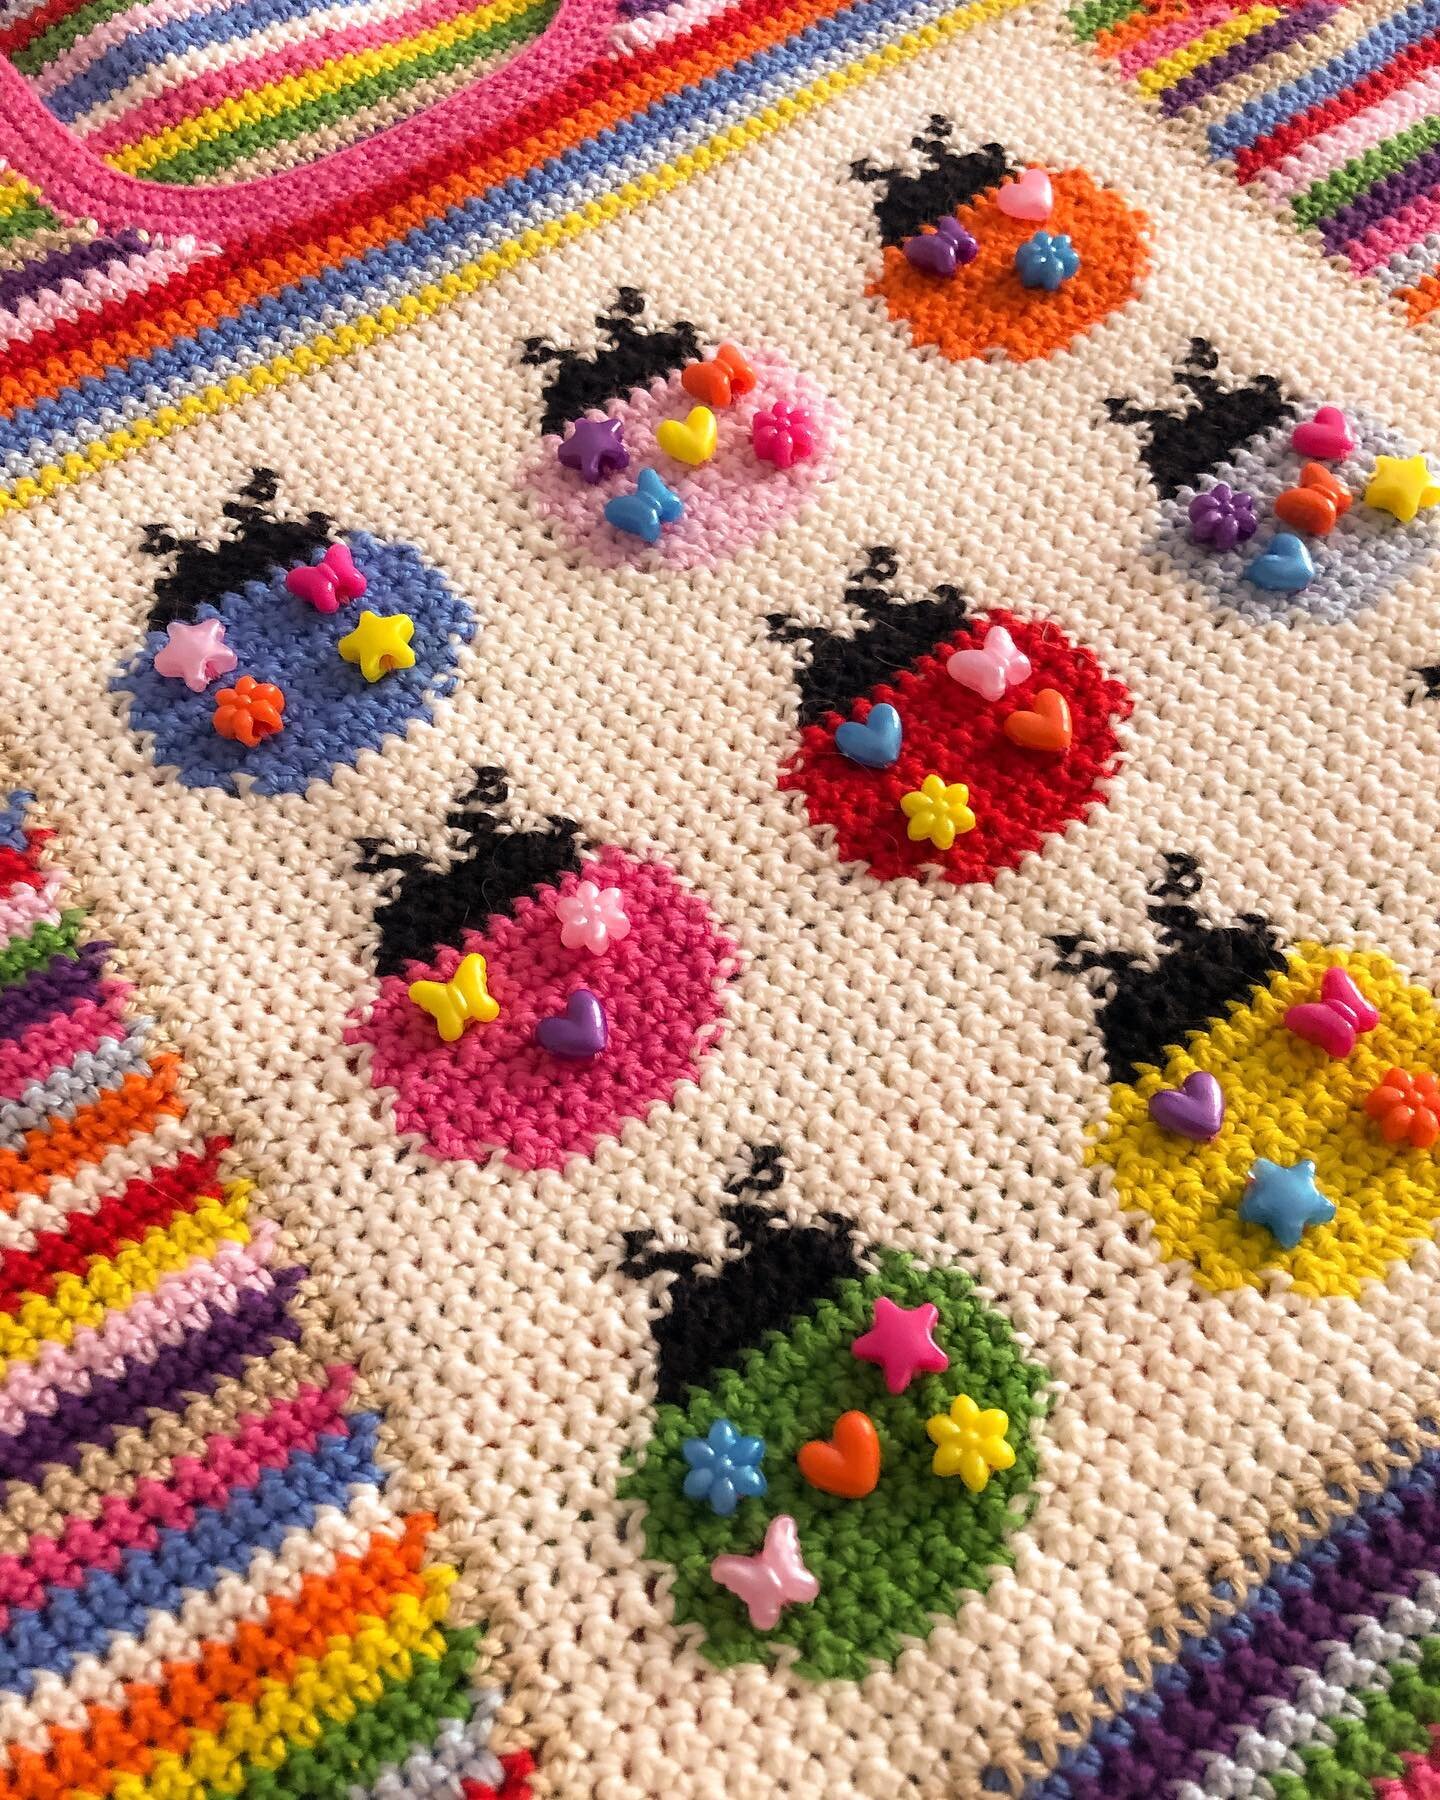 couldn&rsquo;t resist posting a bit more of my #ladybugvest by @crochetpizza - aren&rsquo;t these lil beads just the cutest find?! And I can&rsquo;t get over the beautiful texture that single crochet creates 🧶

Pattern dropping tomorrow!!

#crochet 